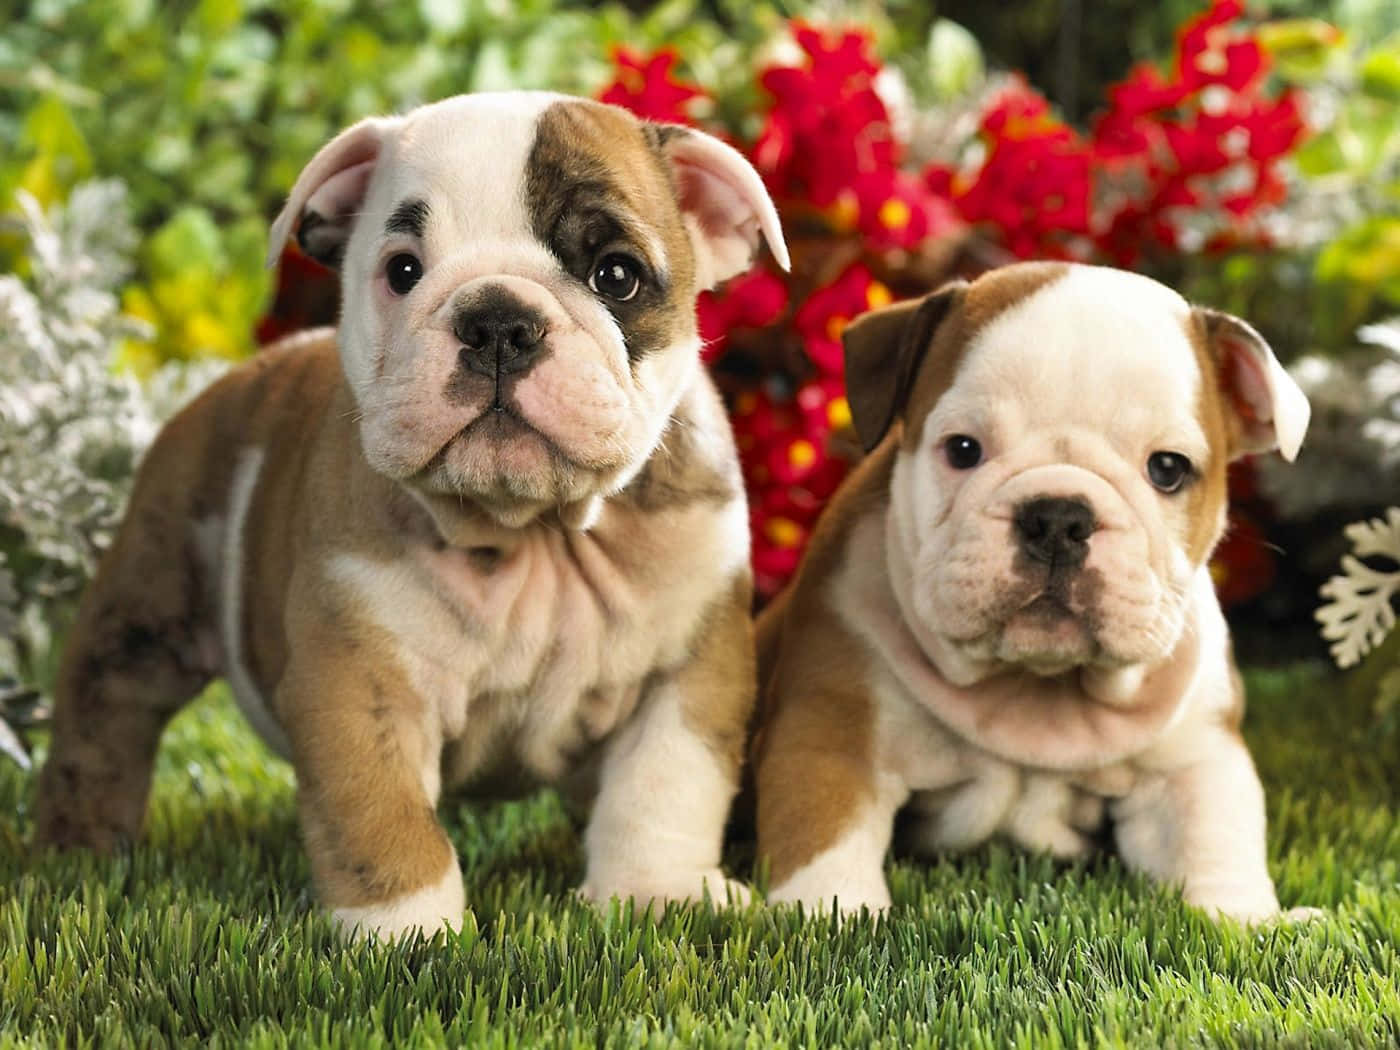 Puppy Wrinkly Face Bulldog Picture